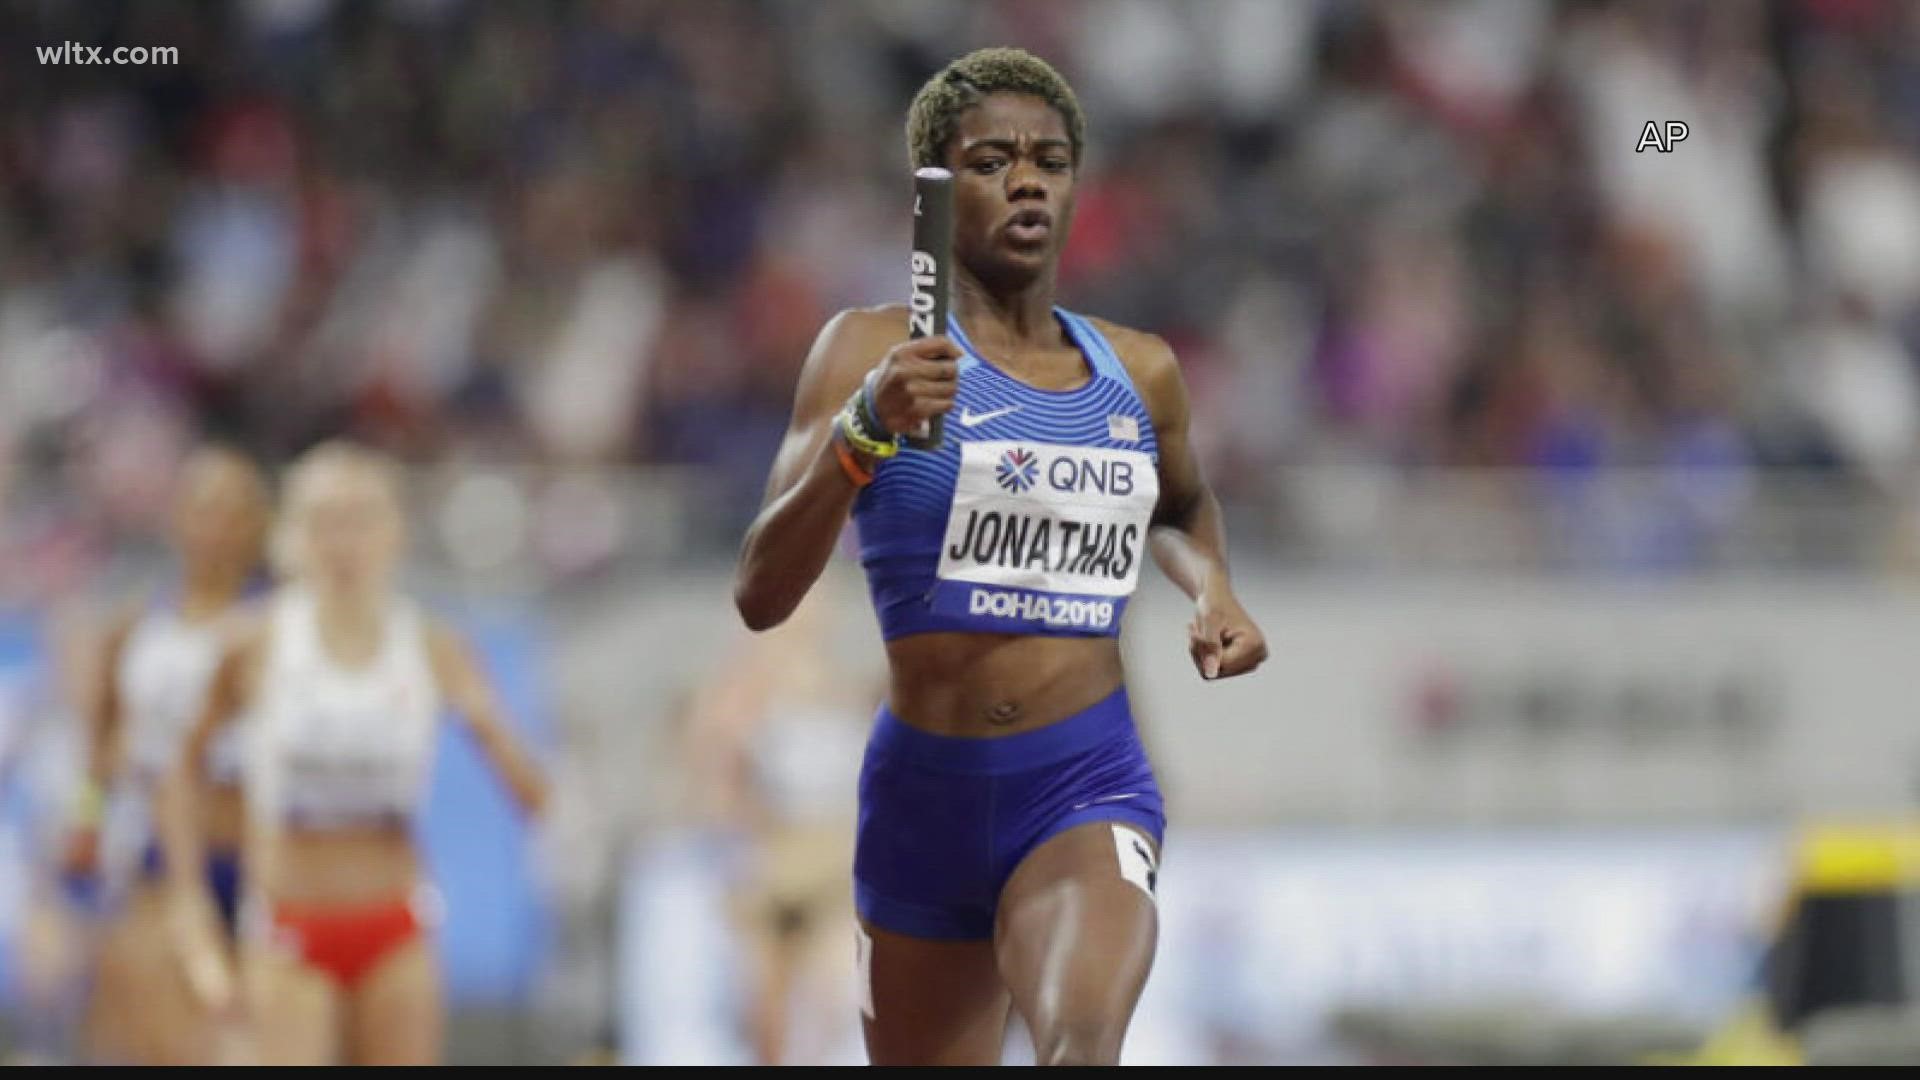 Wadeline Jonathas won an Olympic Gold Medal Saturday as a member of Team USA's 4x400 relay team.